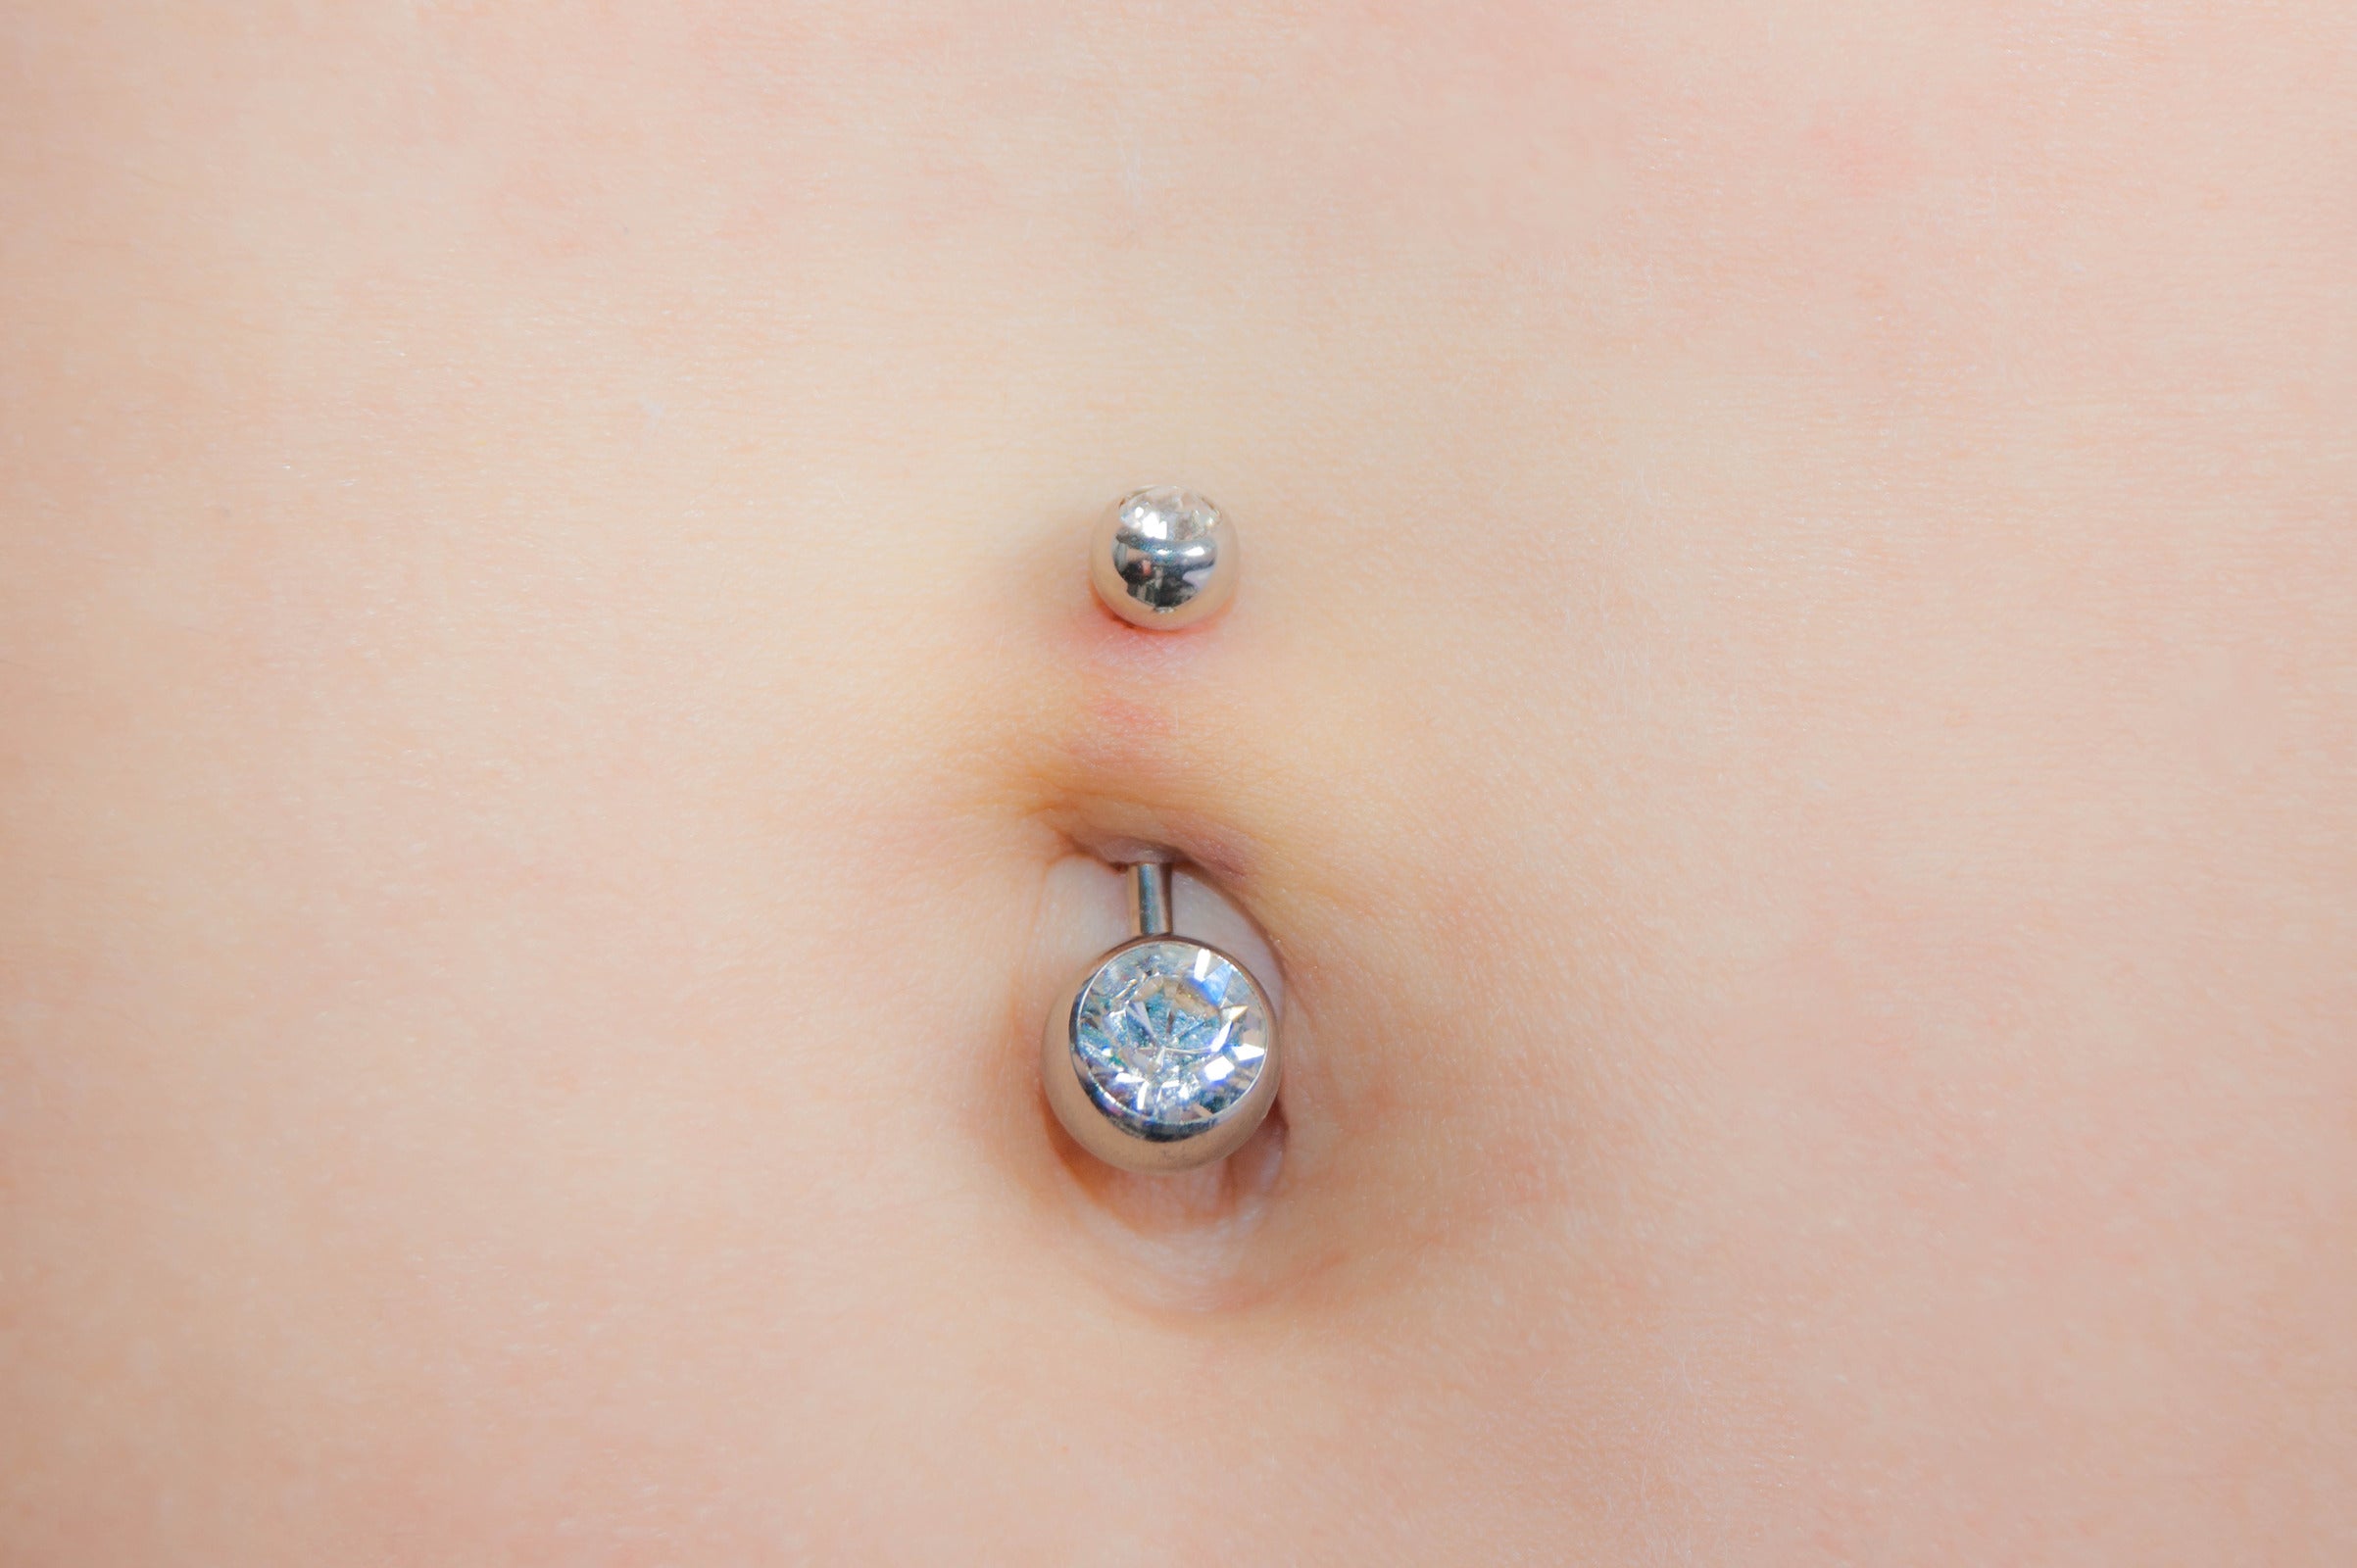 6 Risks of Getting an Outie Belly Button Piercing